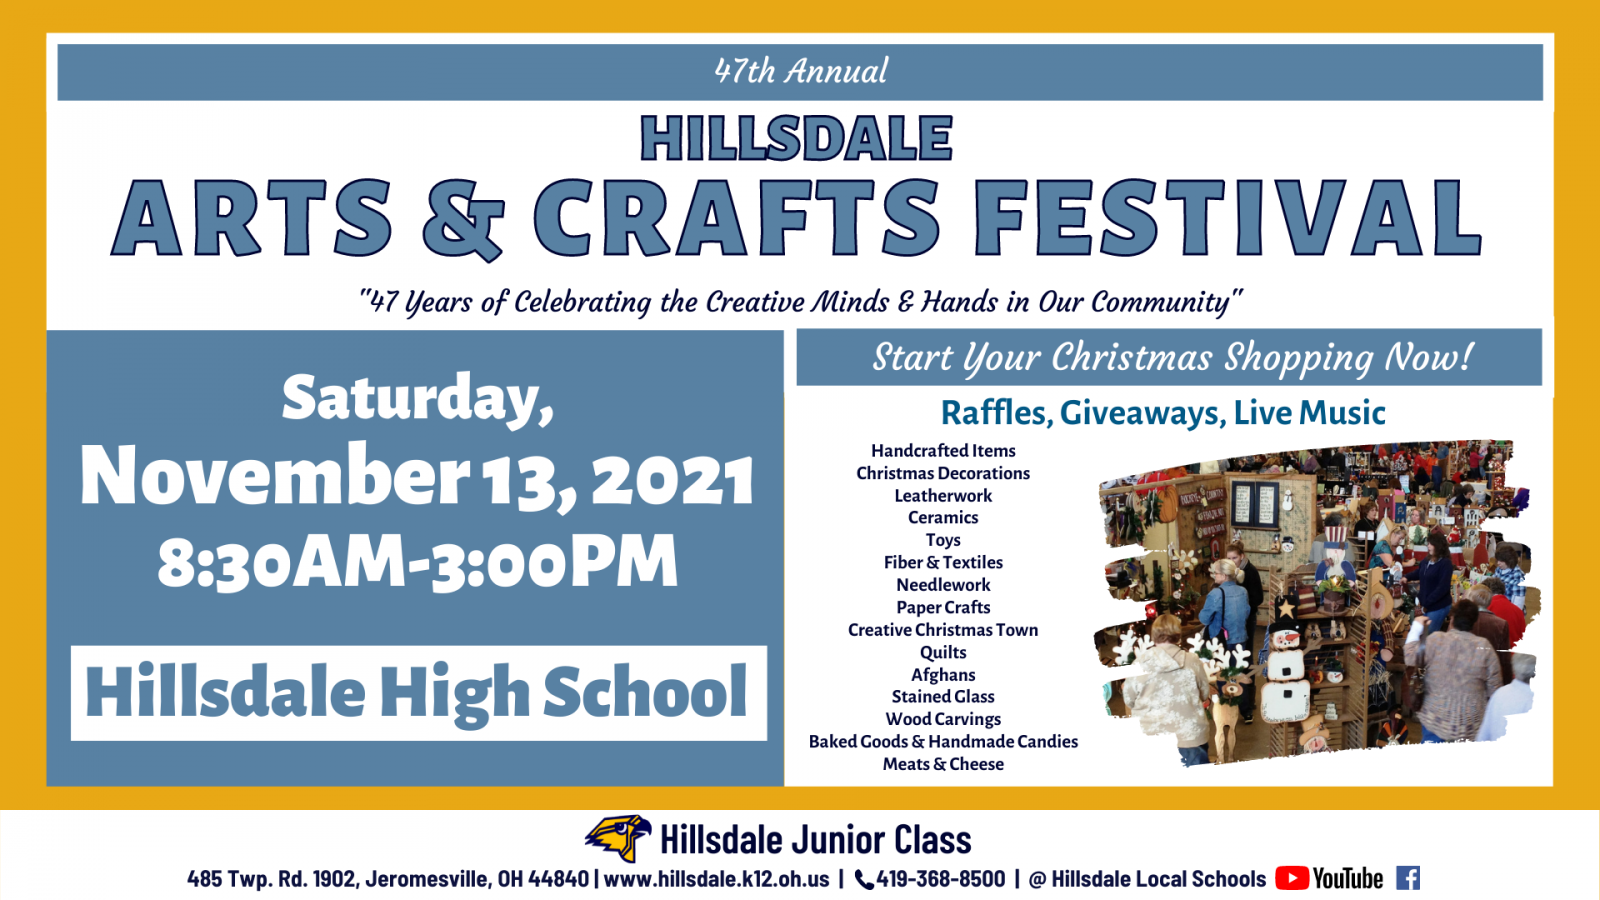 "47th Annual Hillsdale Arts & Crafts Festival; '47 Years of Celebrating the Creative Minds and hands in the Community;' Saturday, November 13, 2021, 8:30 AM to 3 PM Hillsdale High School; 'Start Your Christmas Shopping Now!' Raffles, Giveaways, Live Music; with a list of vendor categories. Hillsdale Junior Class, 485 Twp. Rd. 1902, Jeromesville, Ohio 44840, 419-368-6841, @Hillsdale Local Schools on YouTube and Facebook.